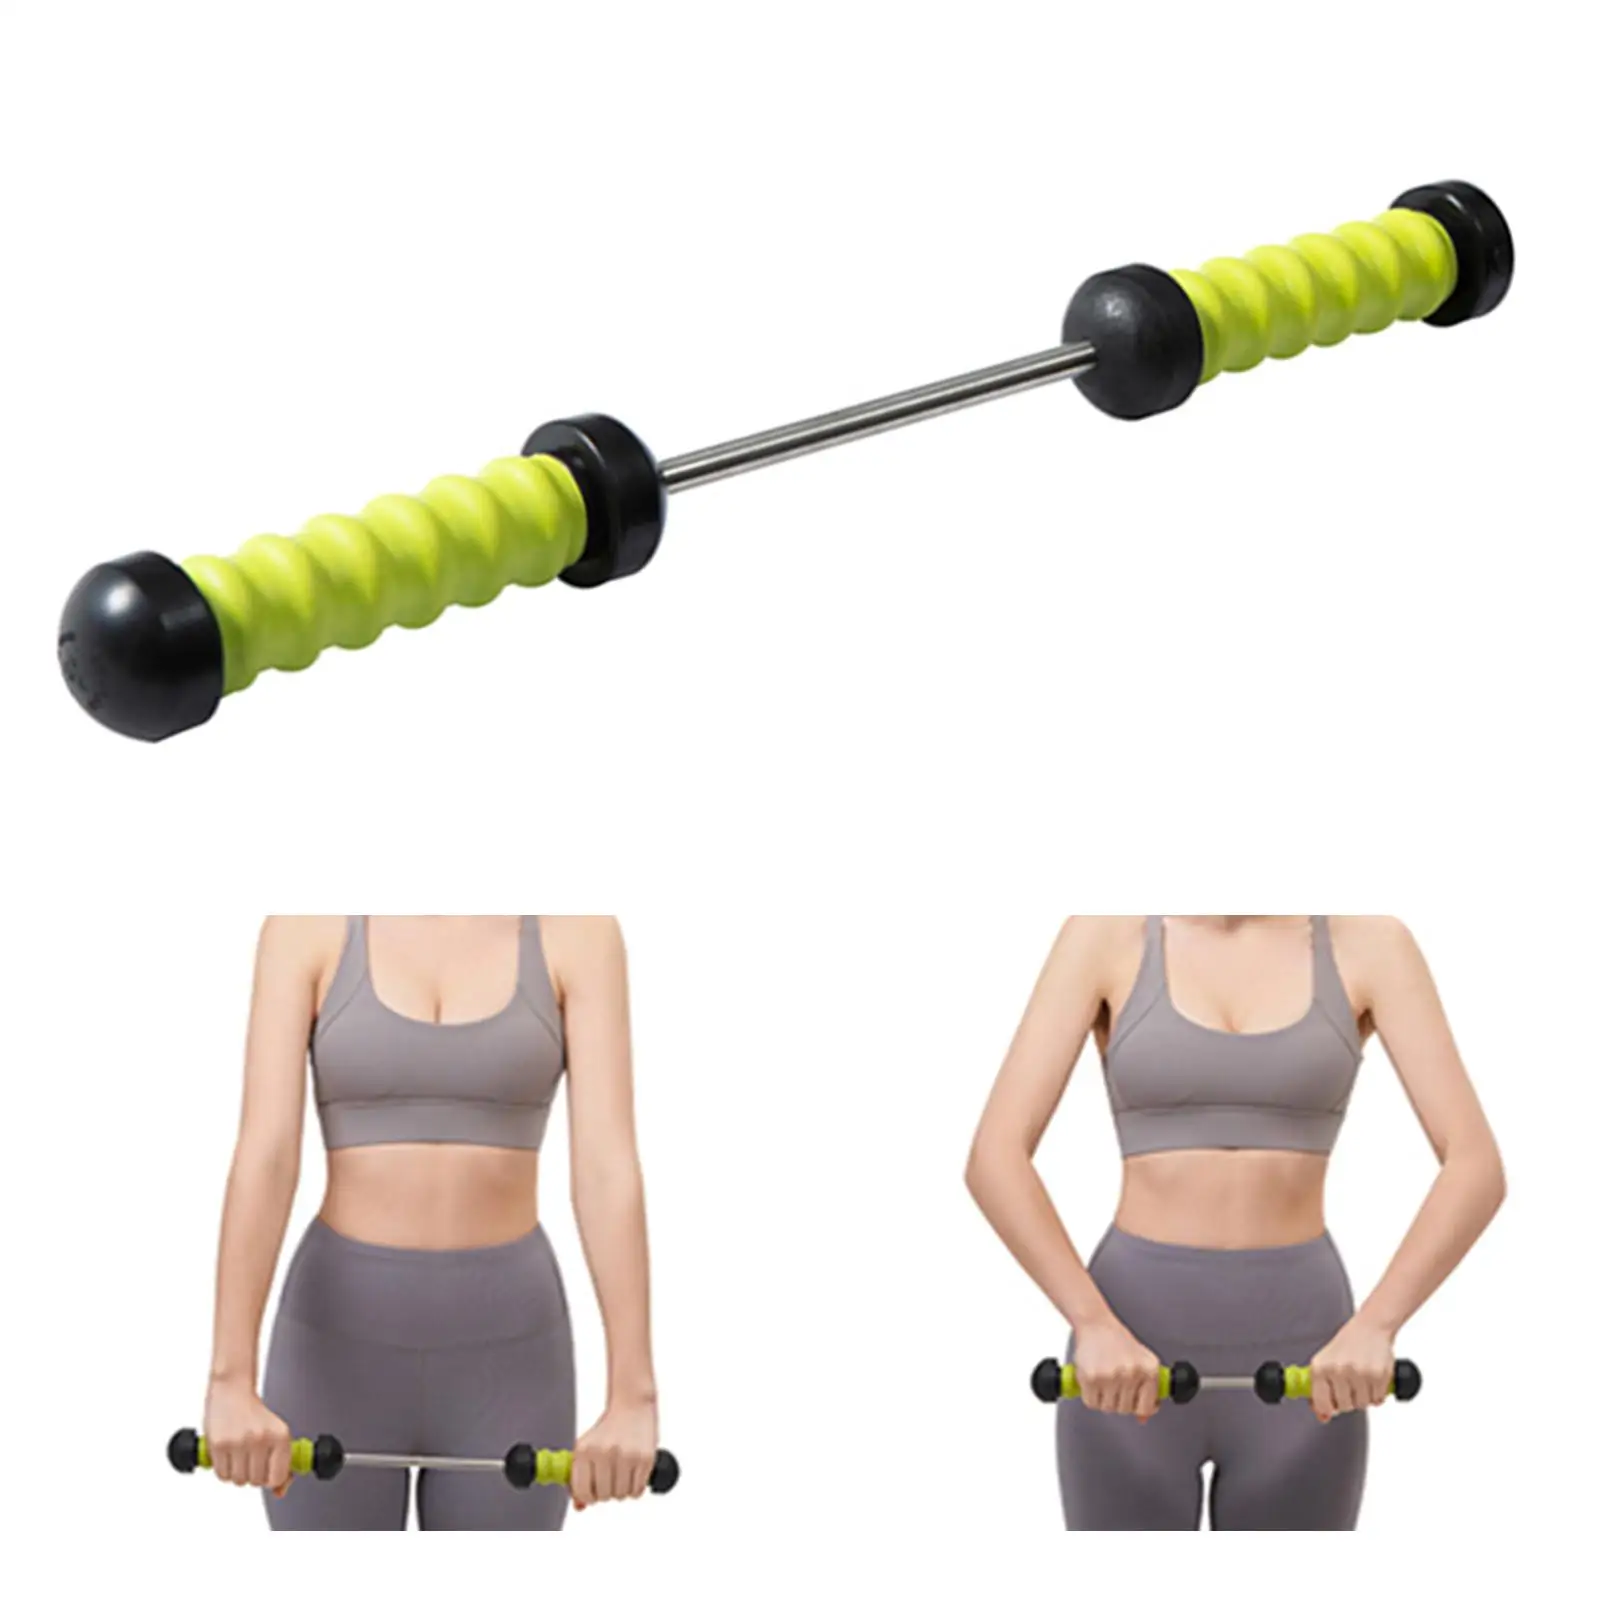 Arm Power Exerciser Chest Expander Muscle Training Bar Resistance Exercise Bands for Strengthener Home Women Men Workout